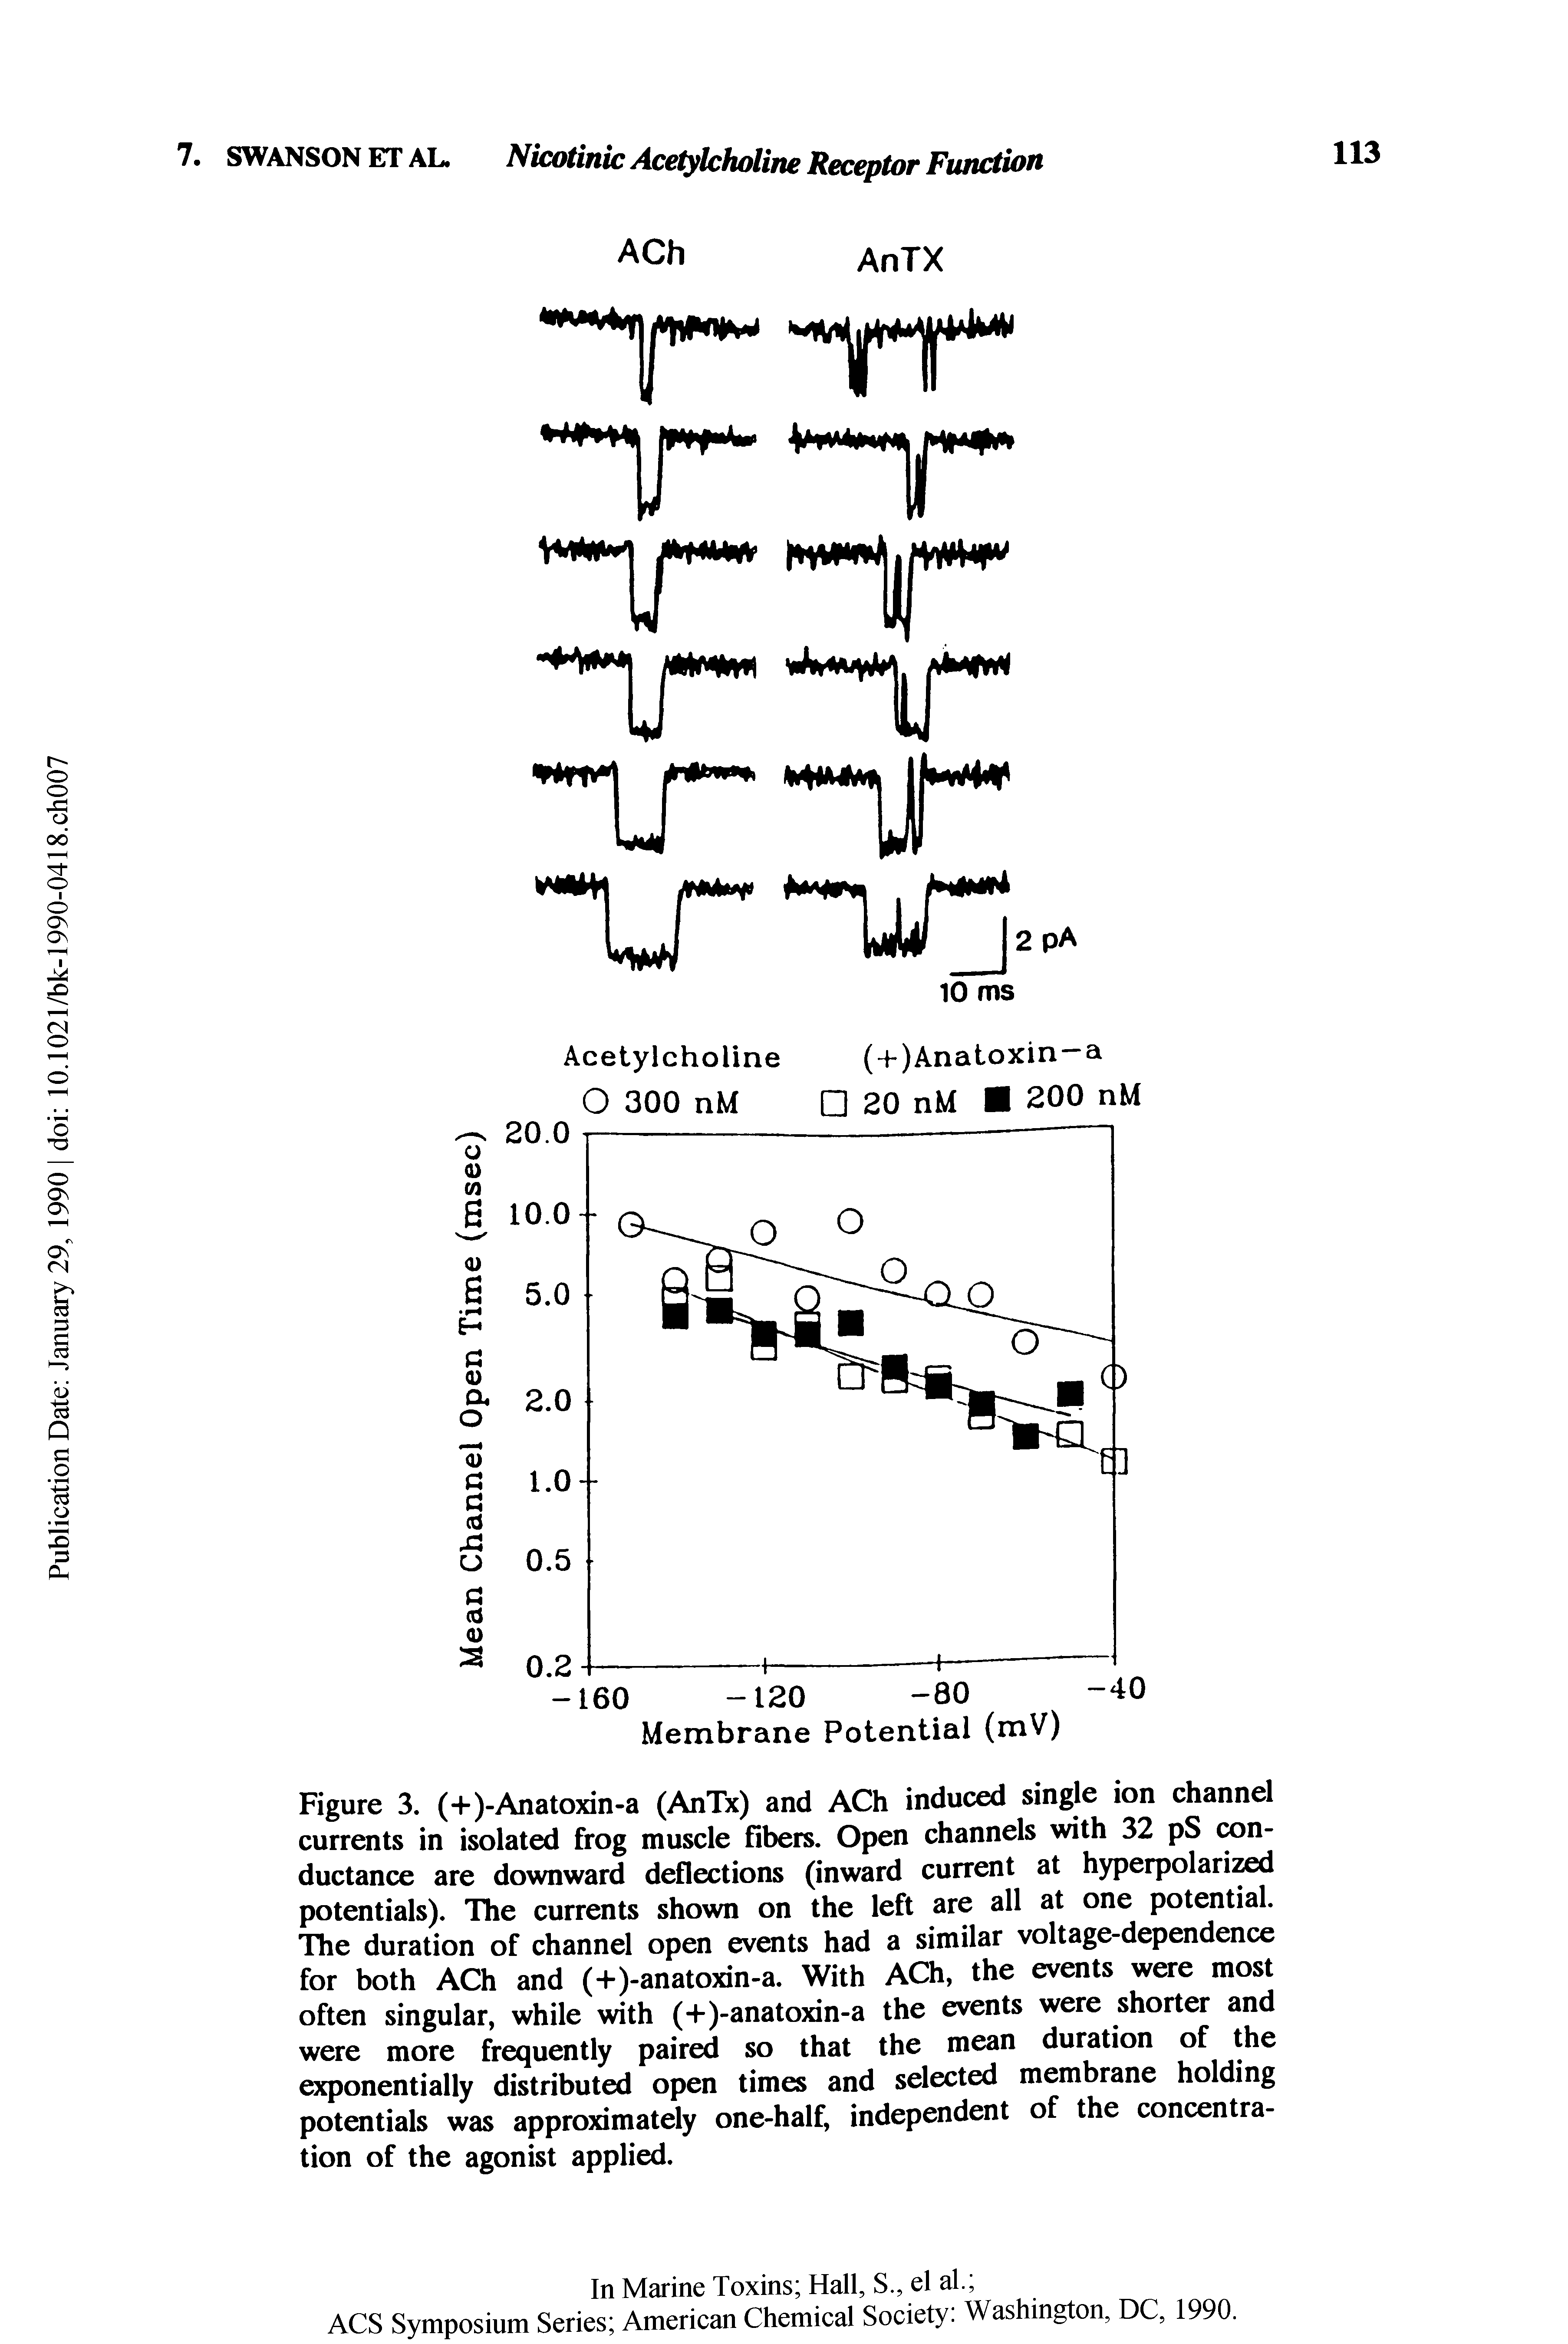 Figure 3. (+)-Anatoxin-a (AnTx) and ACh induced single ion channel currents in isolated frog muscle fibers. Open channels with 32 pS conductance are downward deflections (inward current at hyperpolarized potentials). The currents shown on the left are all at one potential. The duration of channel open events had a similar voltage-dependence for both ACh and (+)-anatoxin-a. With ACh, the events were most often singular, while with (+)-anatoxin-a the events were shorter and were more frequently paired so that the mean duration of the exponentially distributed open times and selected membrane holding potentials was approximately one-half, independent of the concentration of the agonist applied.